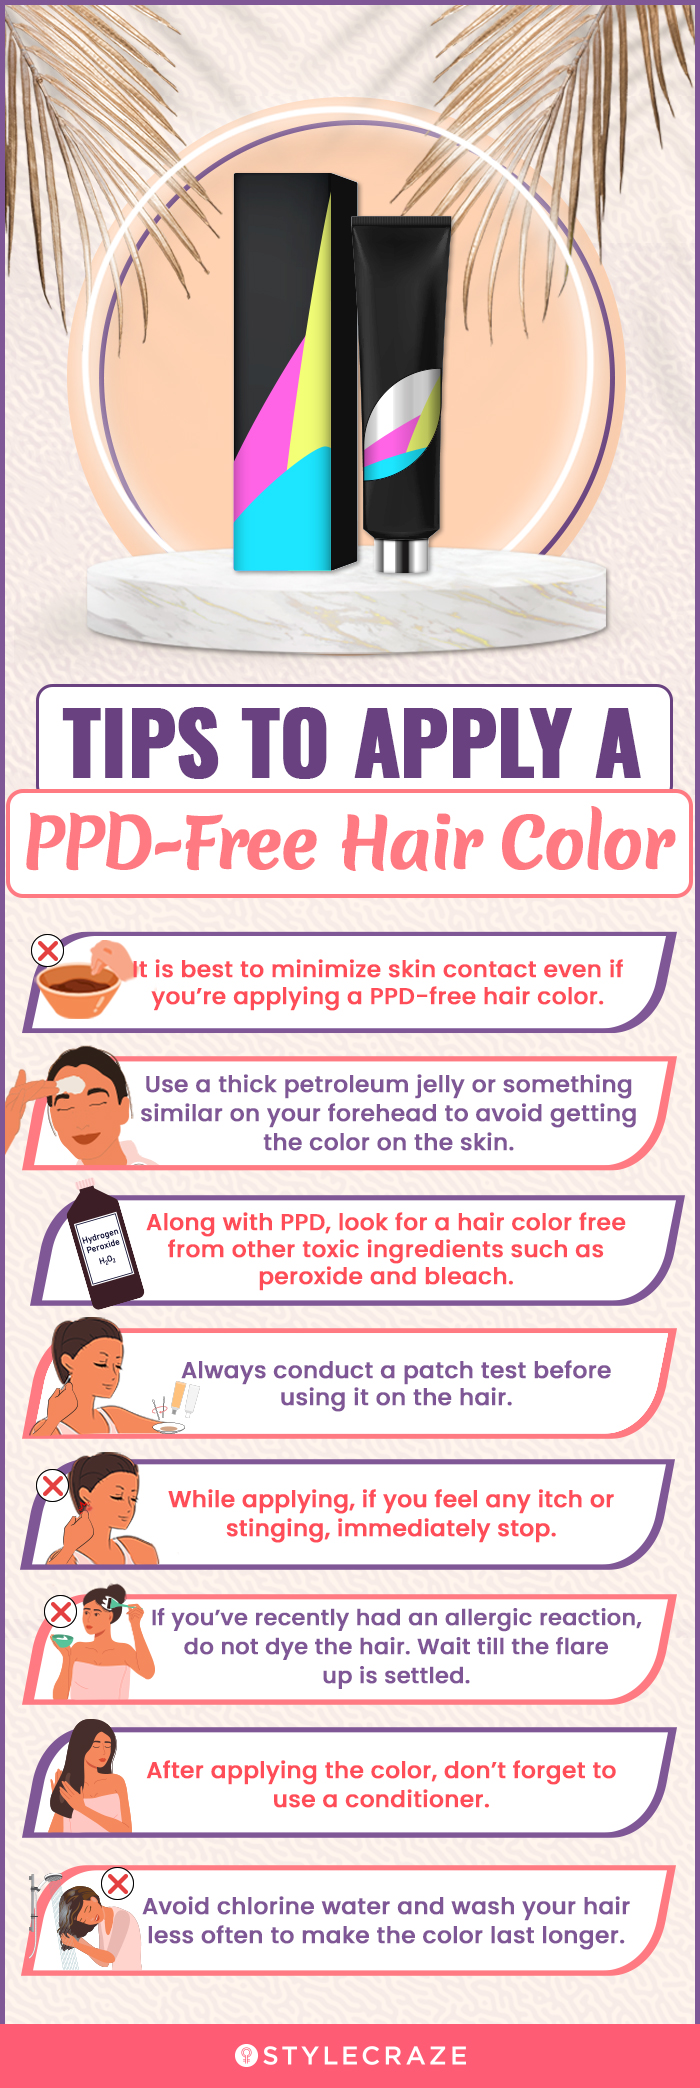 Tips To Apply A PPD-Free Hair Color [infographic]